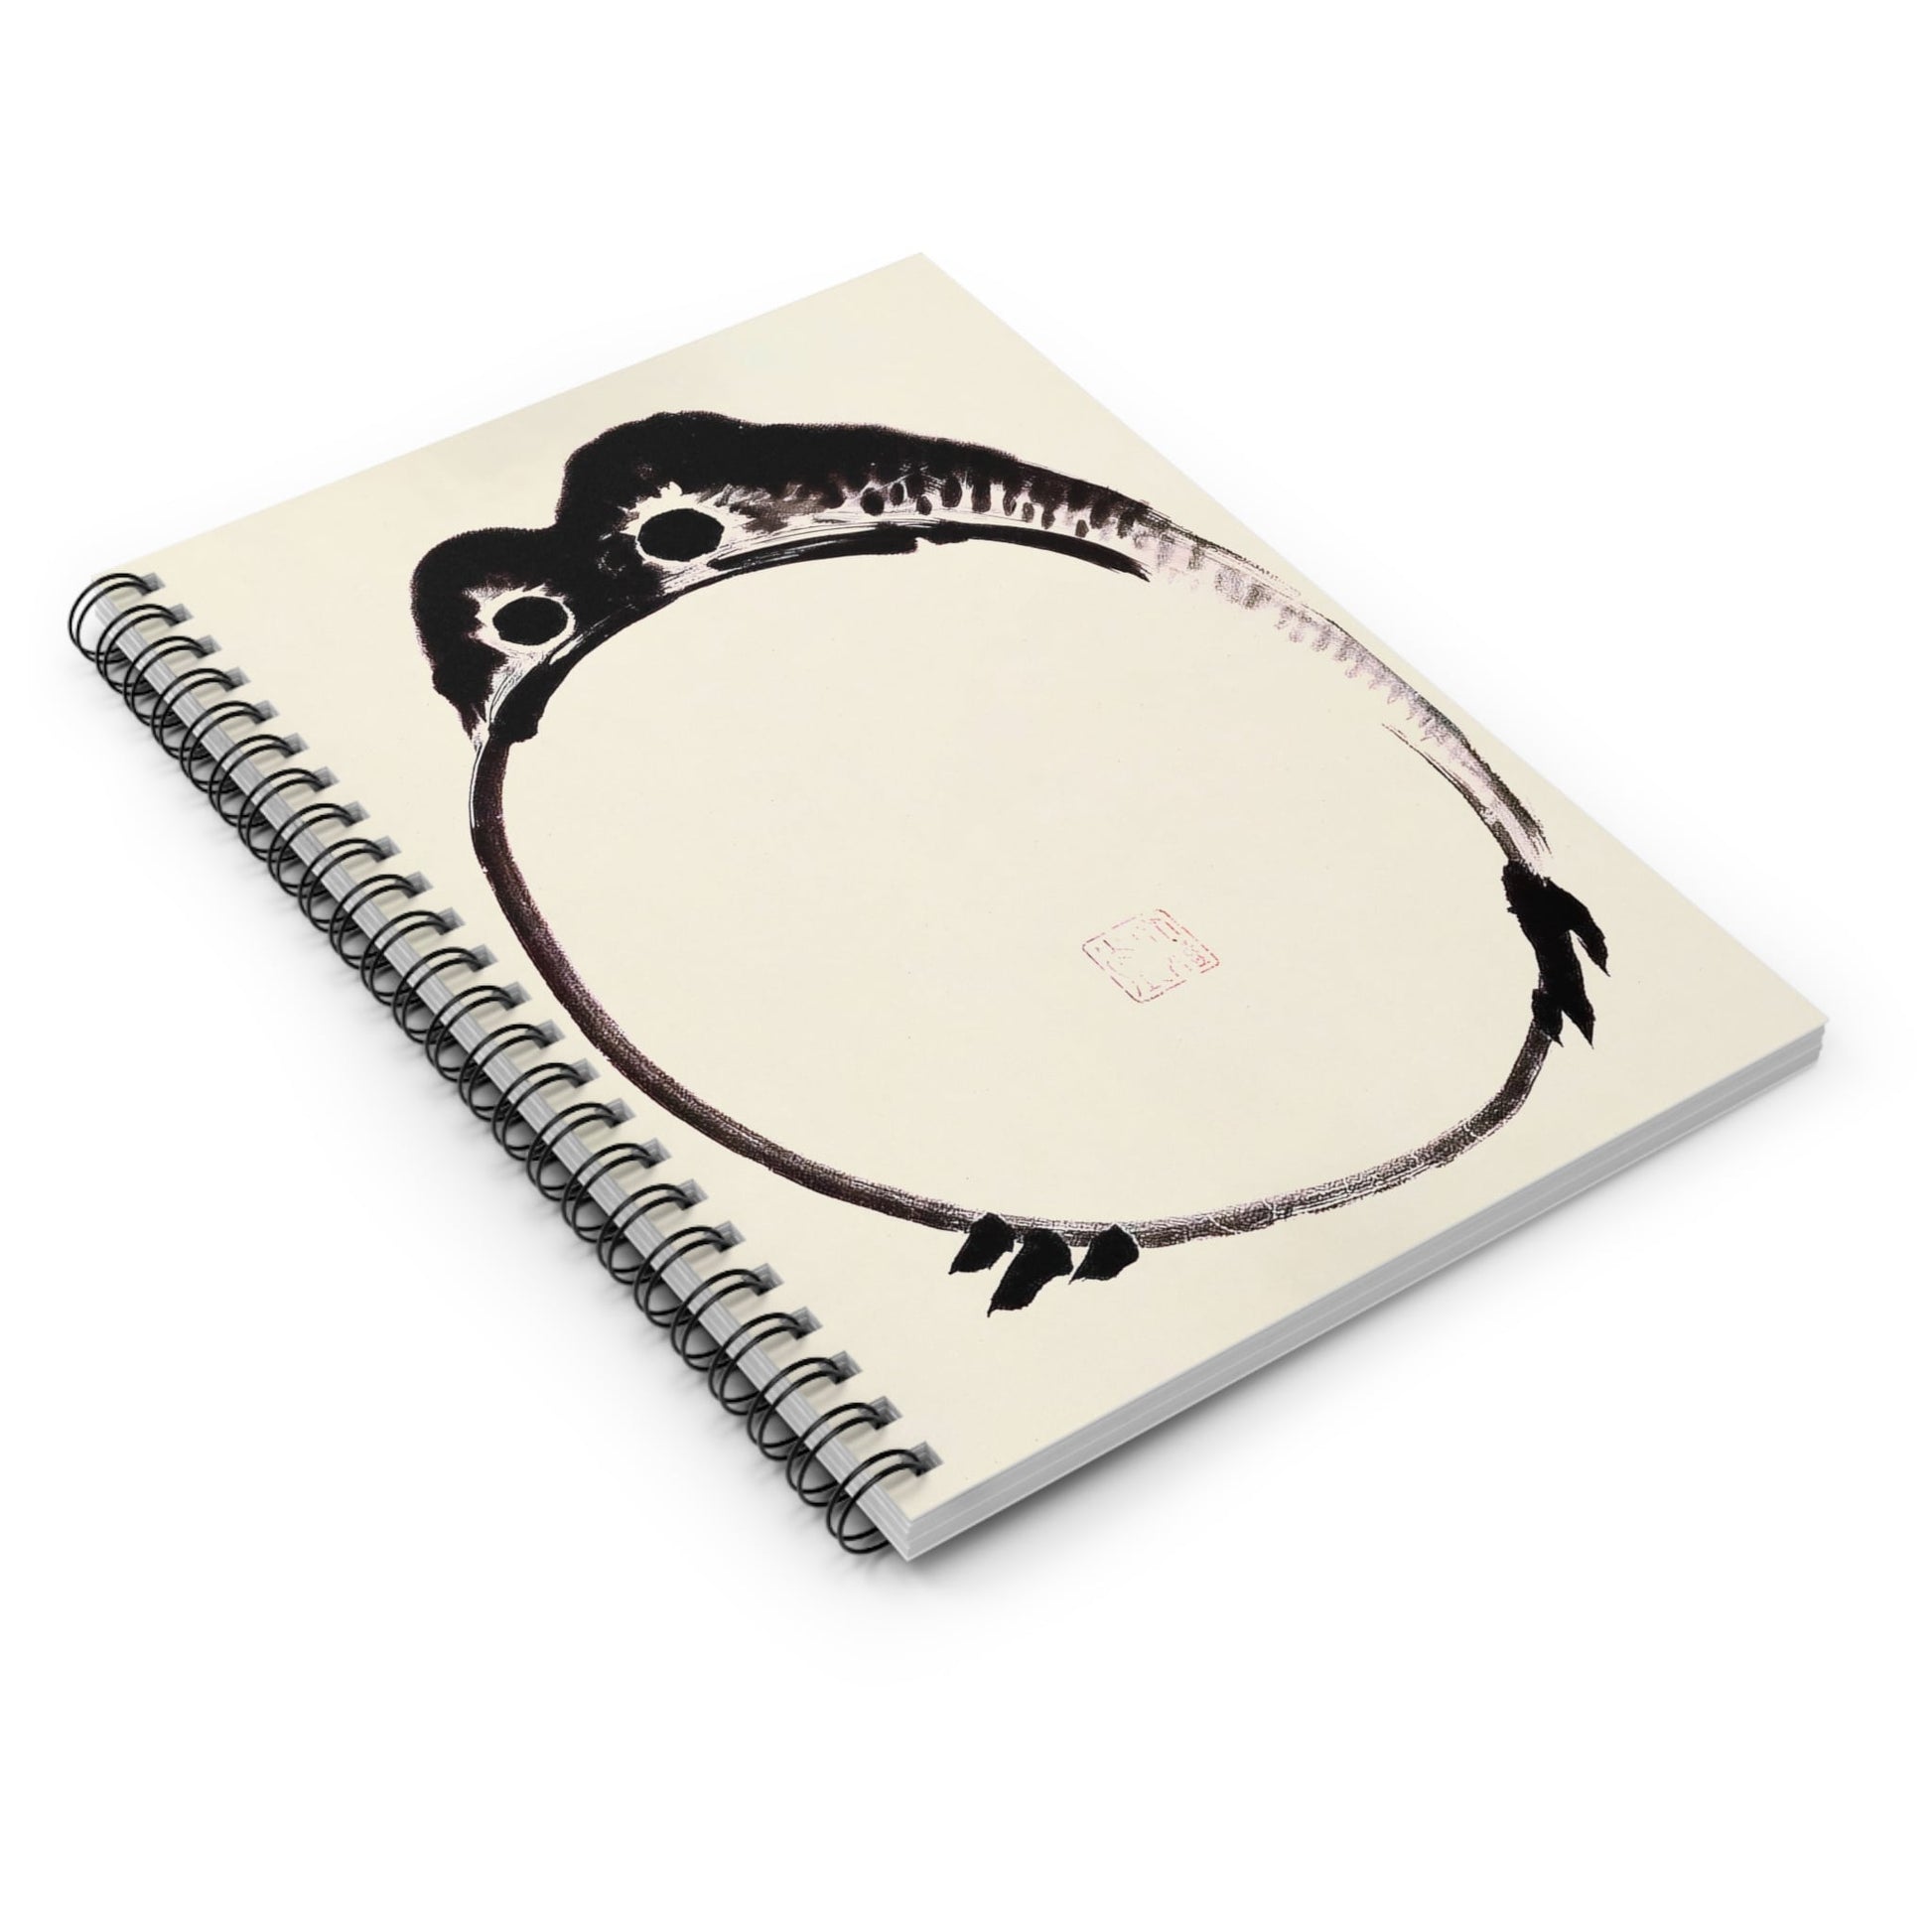 Funny Japanese Toad Spiral Notebook Laying Flat on White Surface